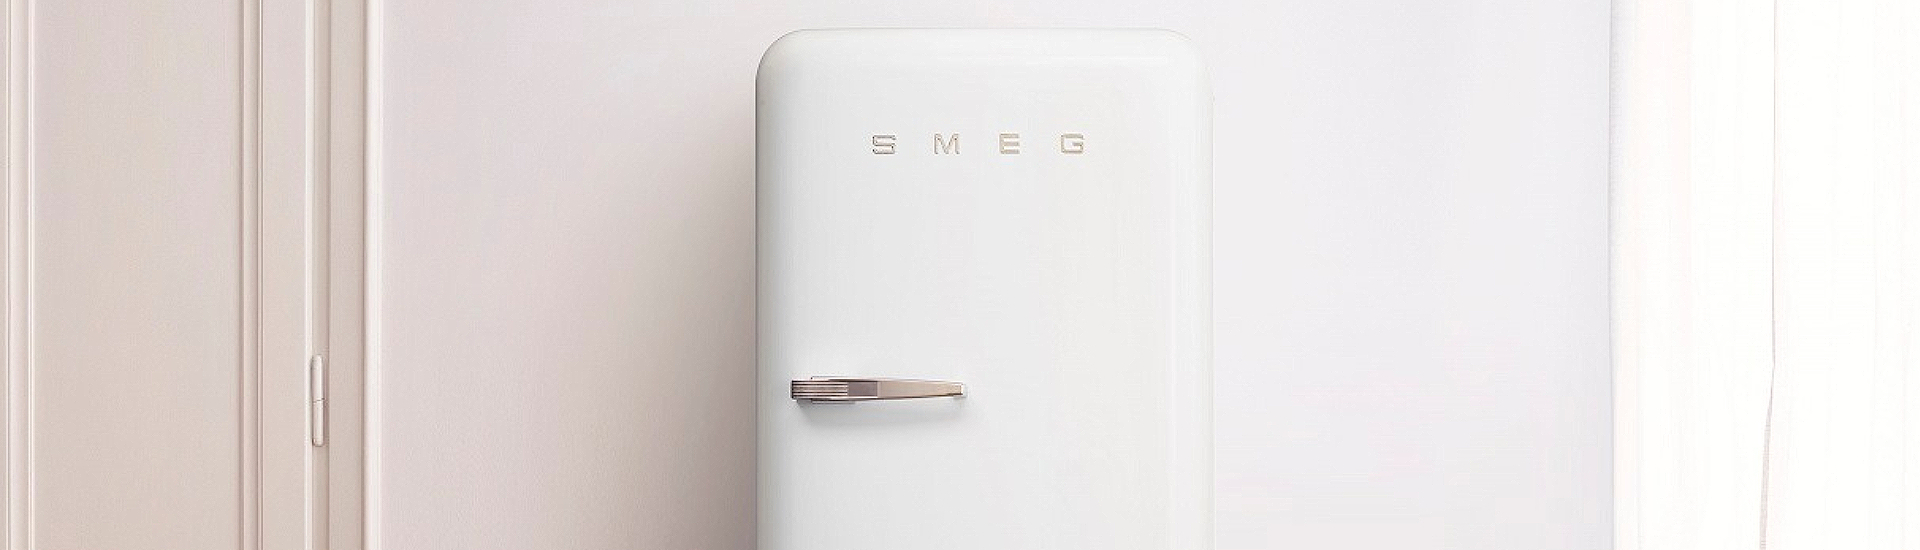 1712894214_from-italy-to-the-world-the-history-of-smegs-fab-fridge.jpg